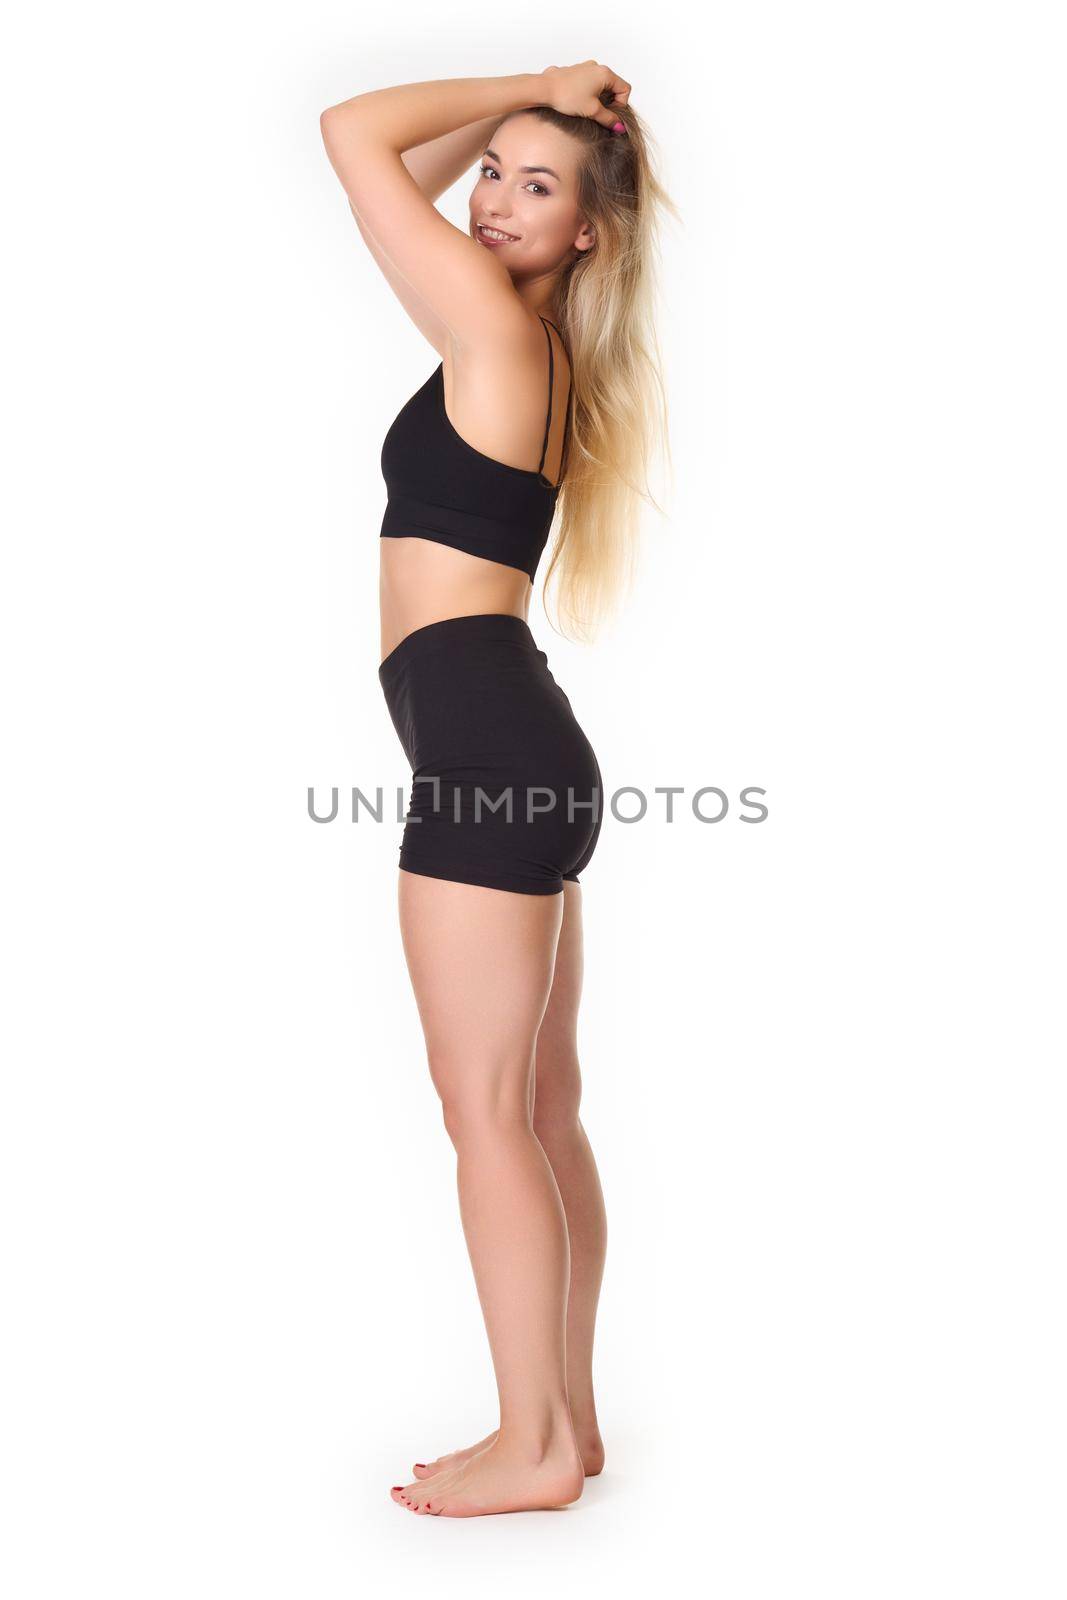 A young woman posing in a sports outfit on a white background by Jarosz